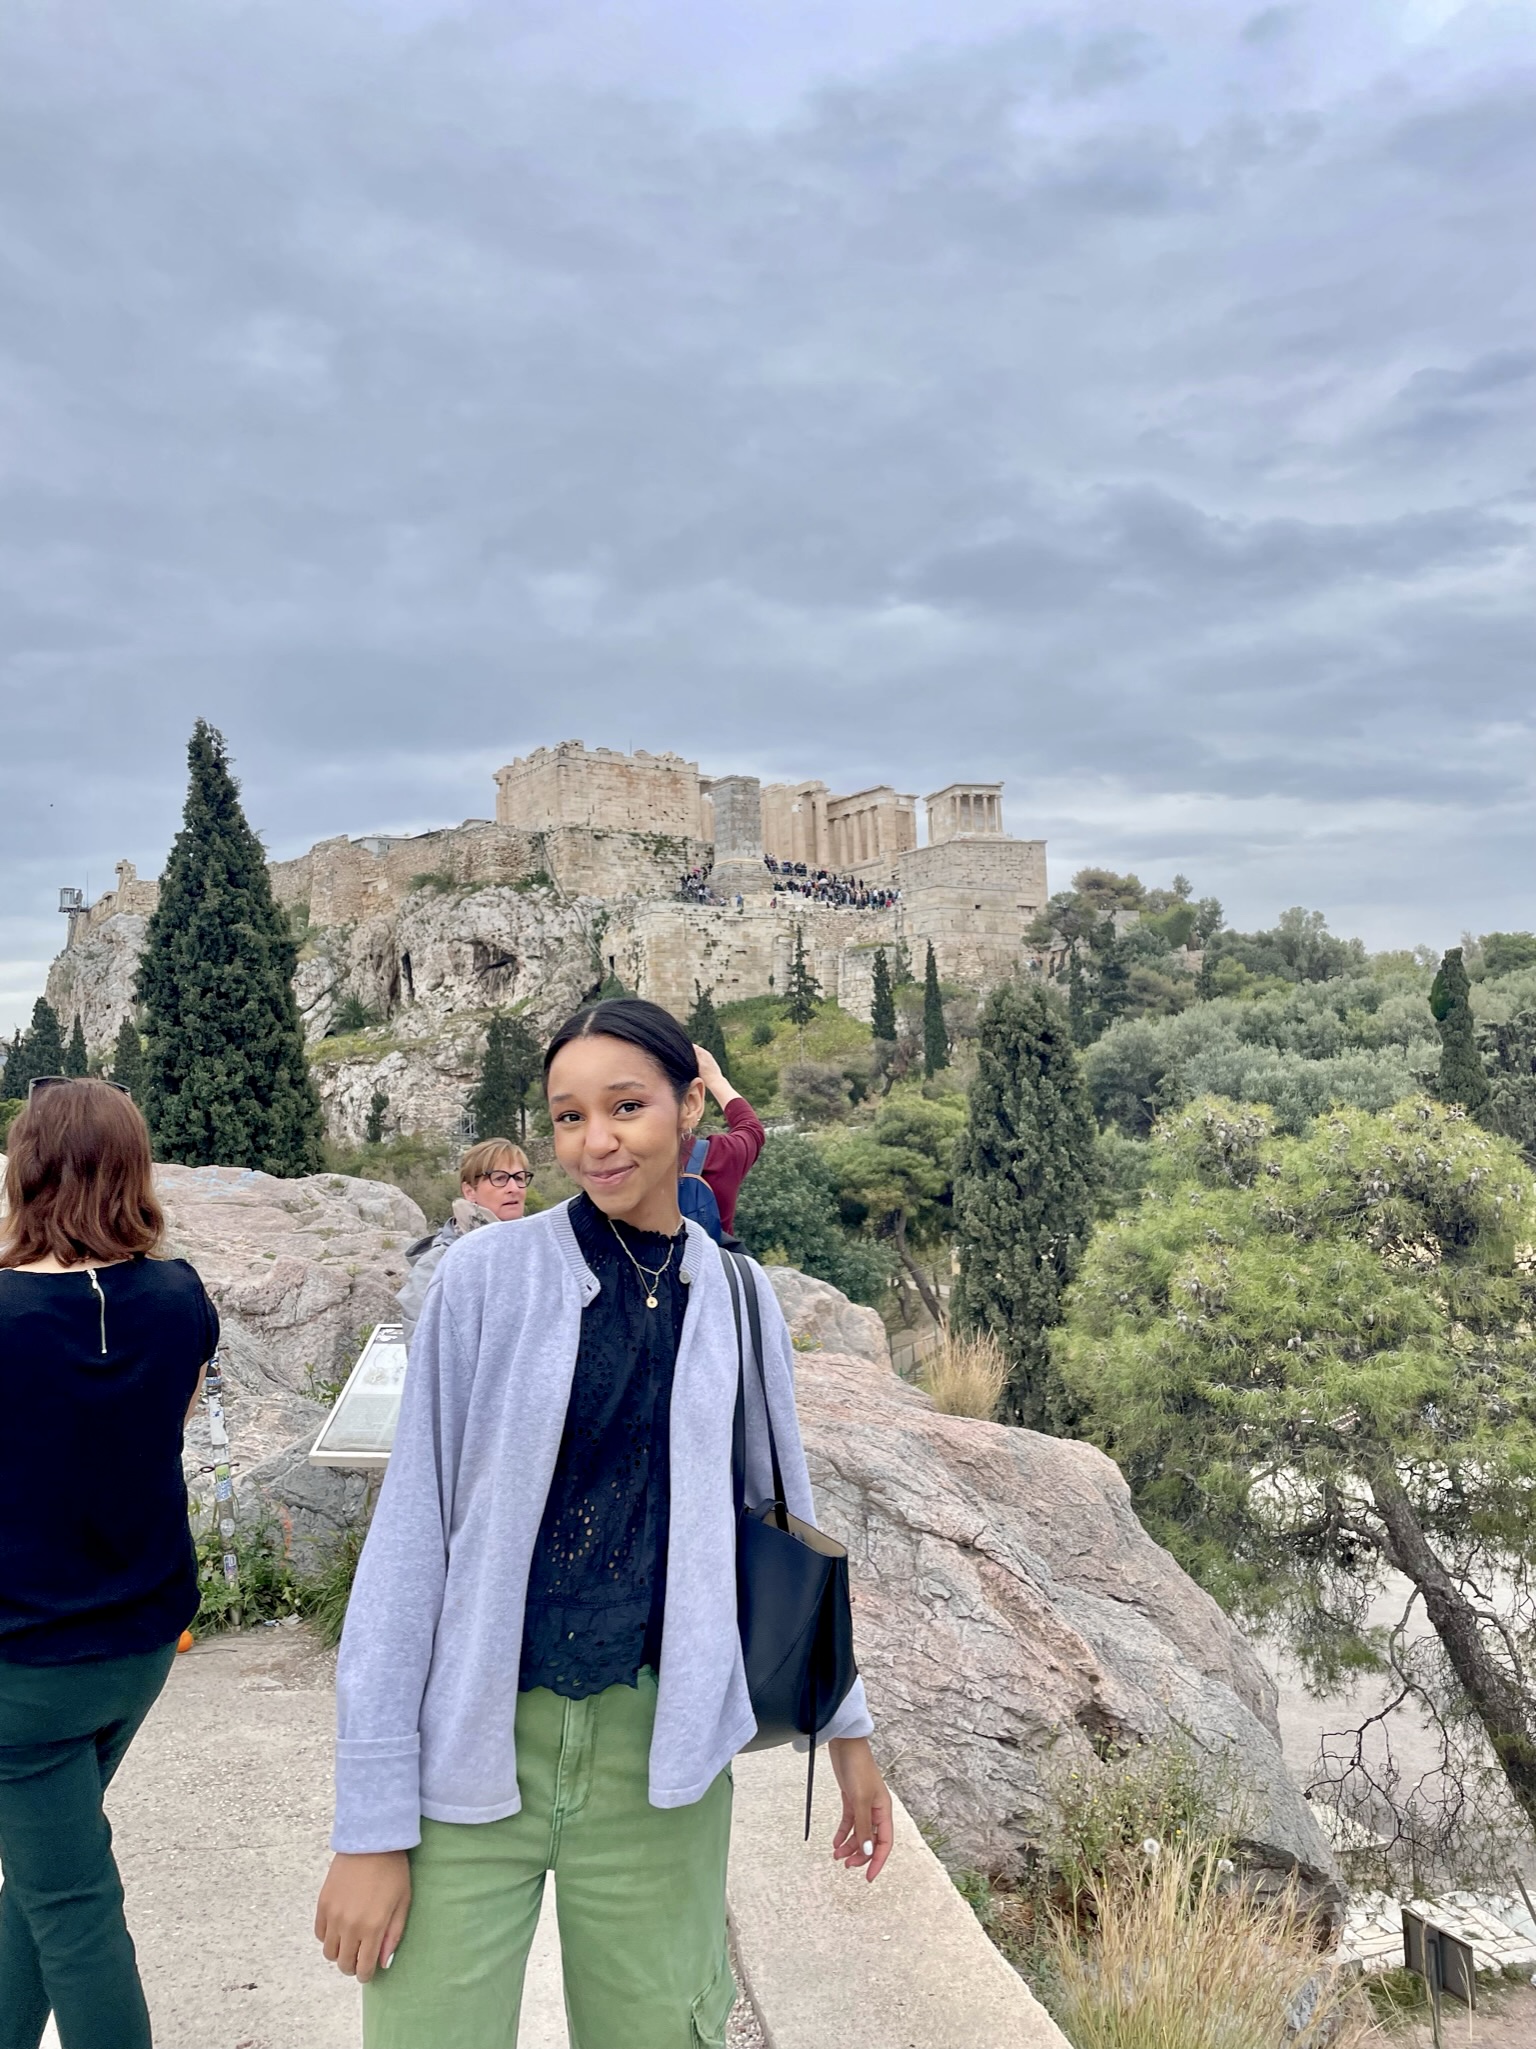 A person in a blue jacket, black shirt, and green pants stands smiling in front of a viewpoint with the Acropolis of Athens in the background. Other visitors and lush greenery are visible under a cloudy sky.